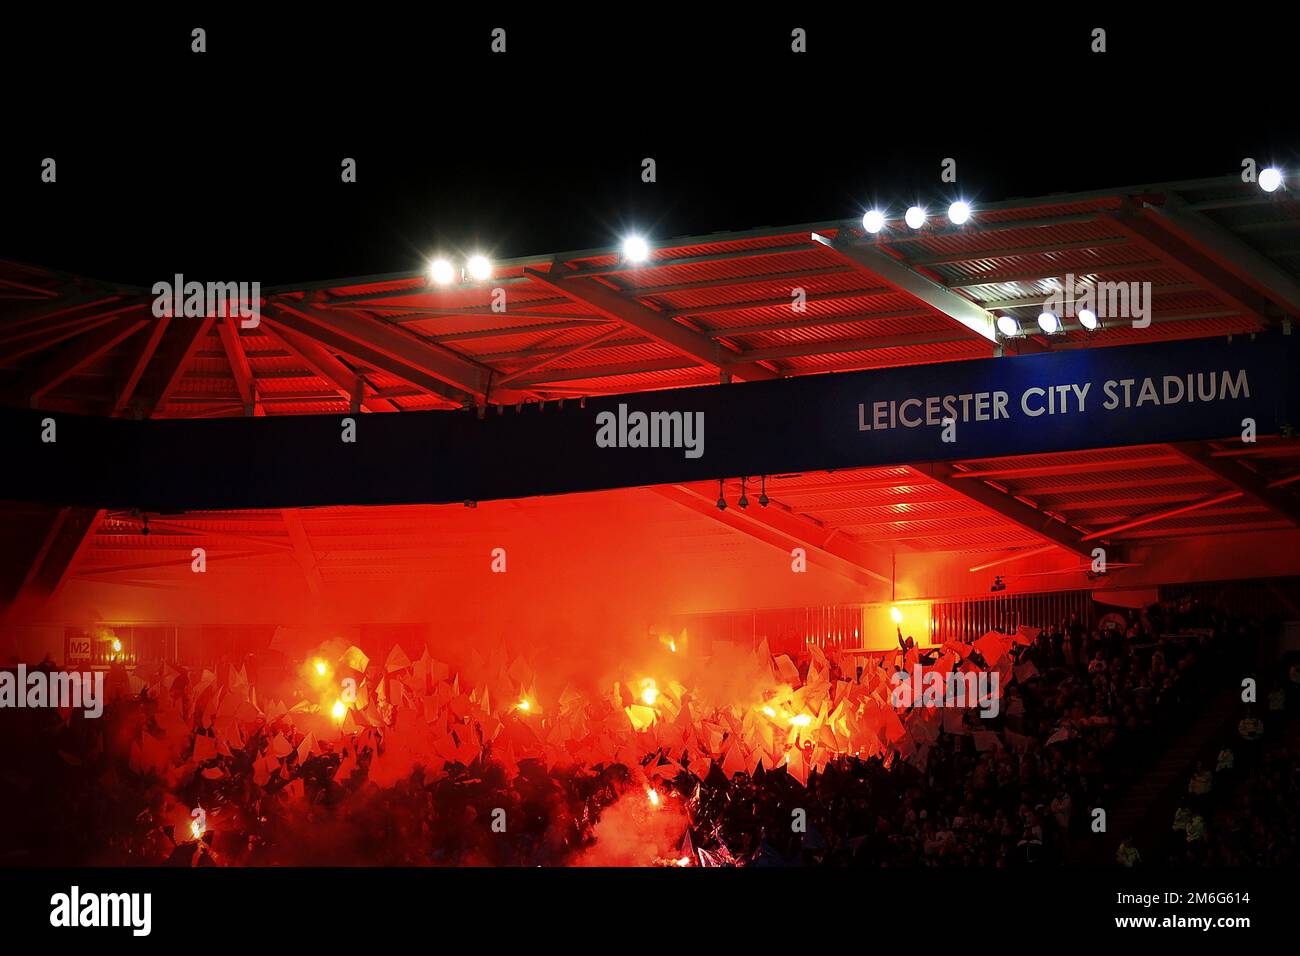 As FC Copenhagen line up the Copenhagen fans light flares in the crowd - Leicester City v FC Copenhagen, UEFA Champions League, Leicester City Stadium, Leicester - 18th October 2016. Stock Photo